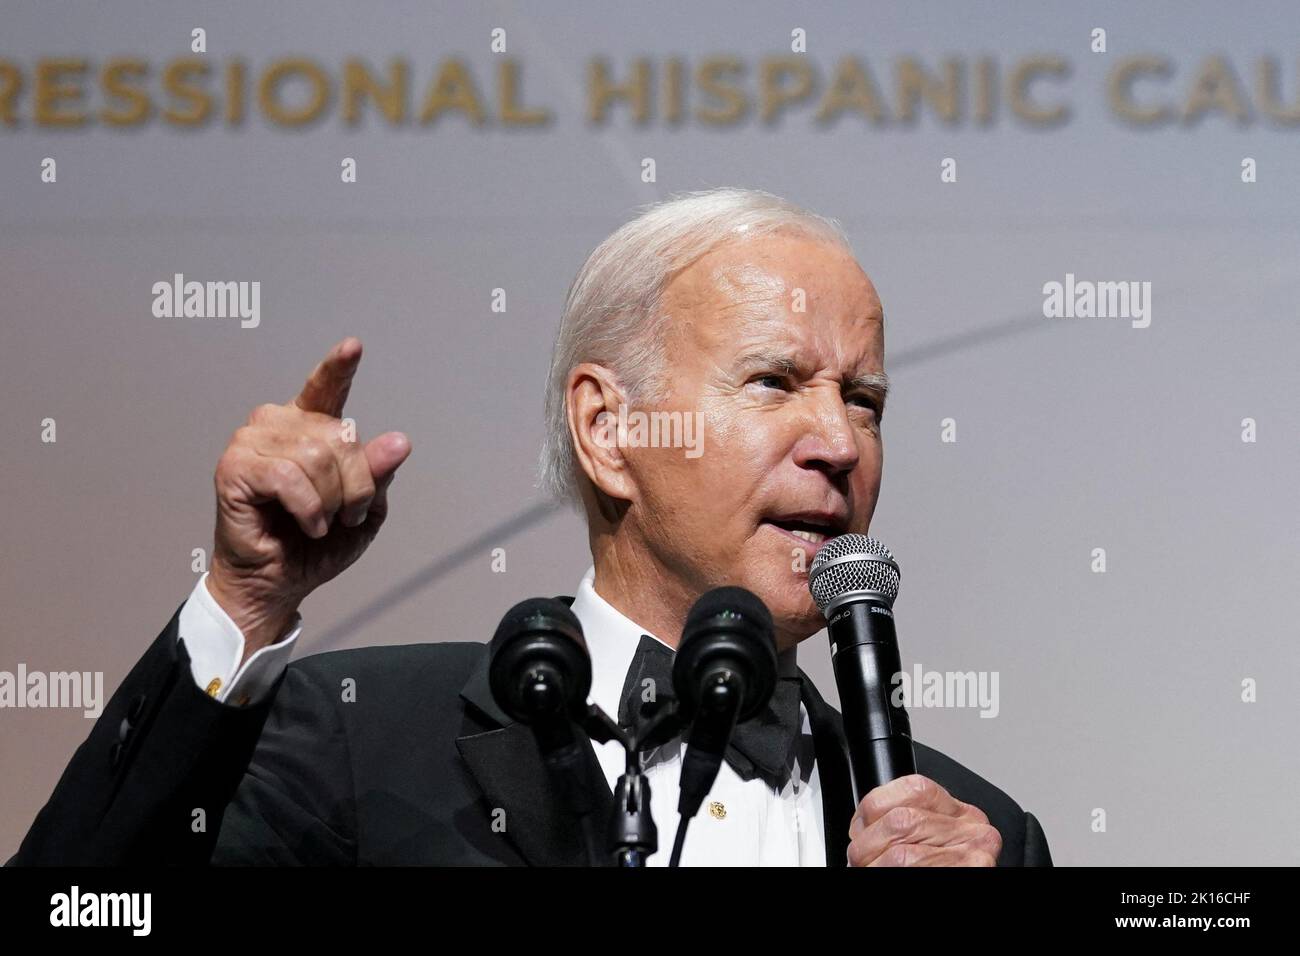 U.S. President Joe Biden speaks as he attends the 45th Congressional Hispanic Caucus Institute Gala to kick-off the White House's celebration of Hispanic Heritage Month, in Washington, U.S. September 15, 2022. REUTERS/Kevin Lamarque Stock Photo